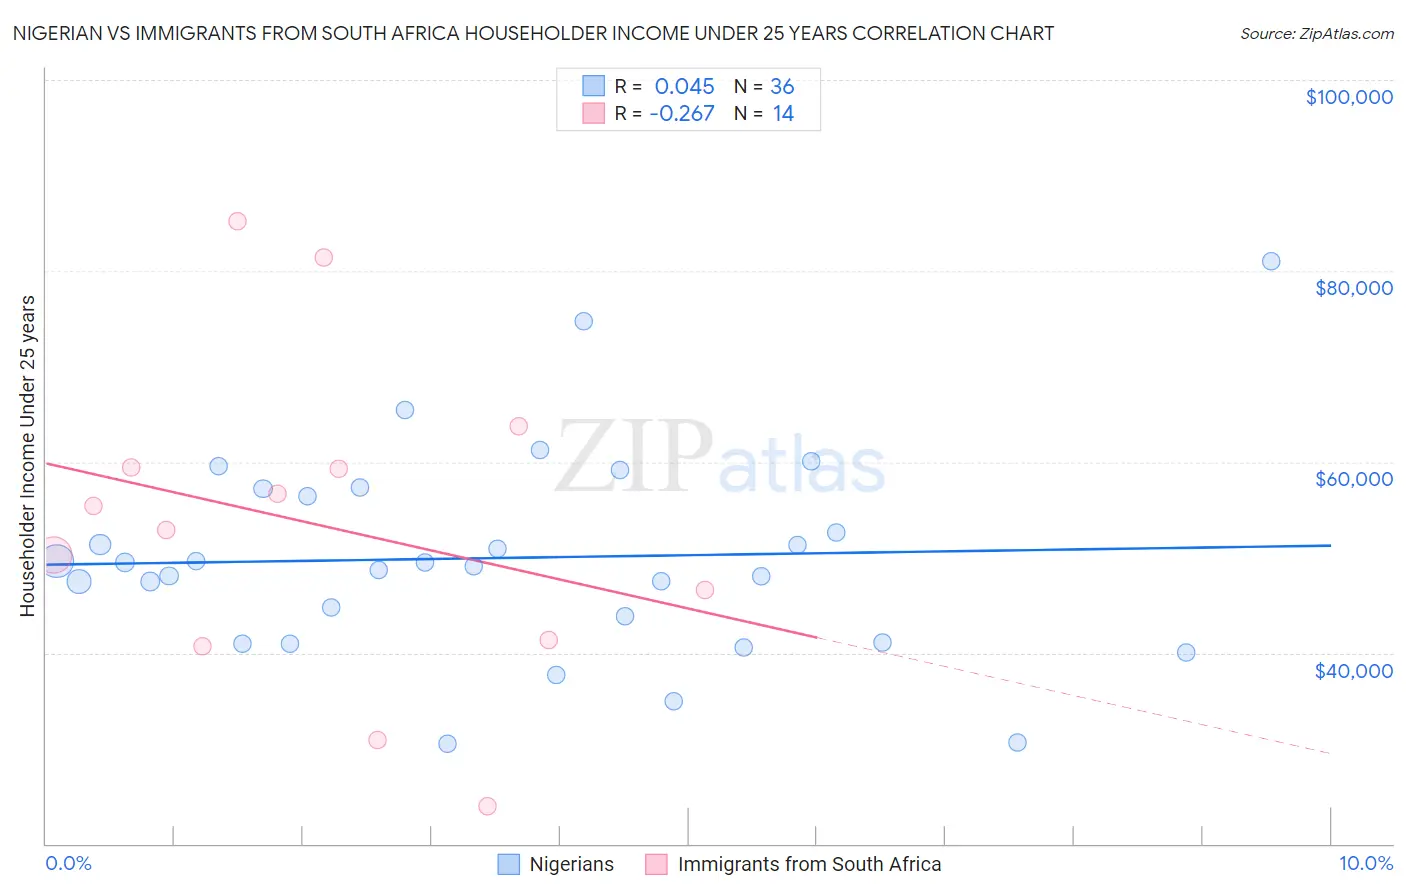 Nigerian vs Immigrants from South Africa Householder Income Under 25 years